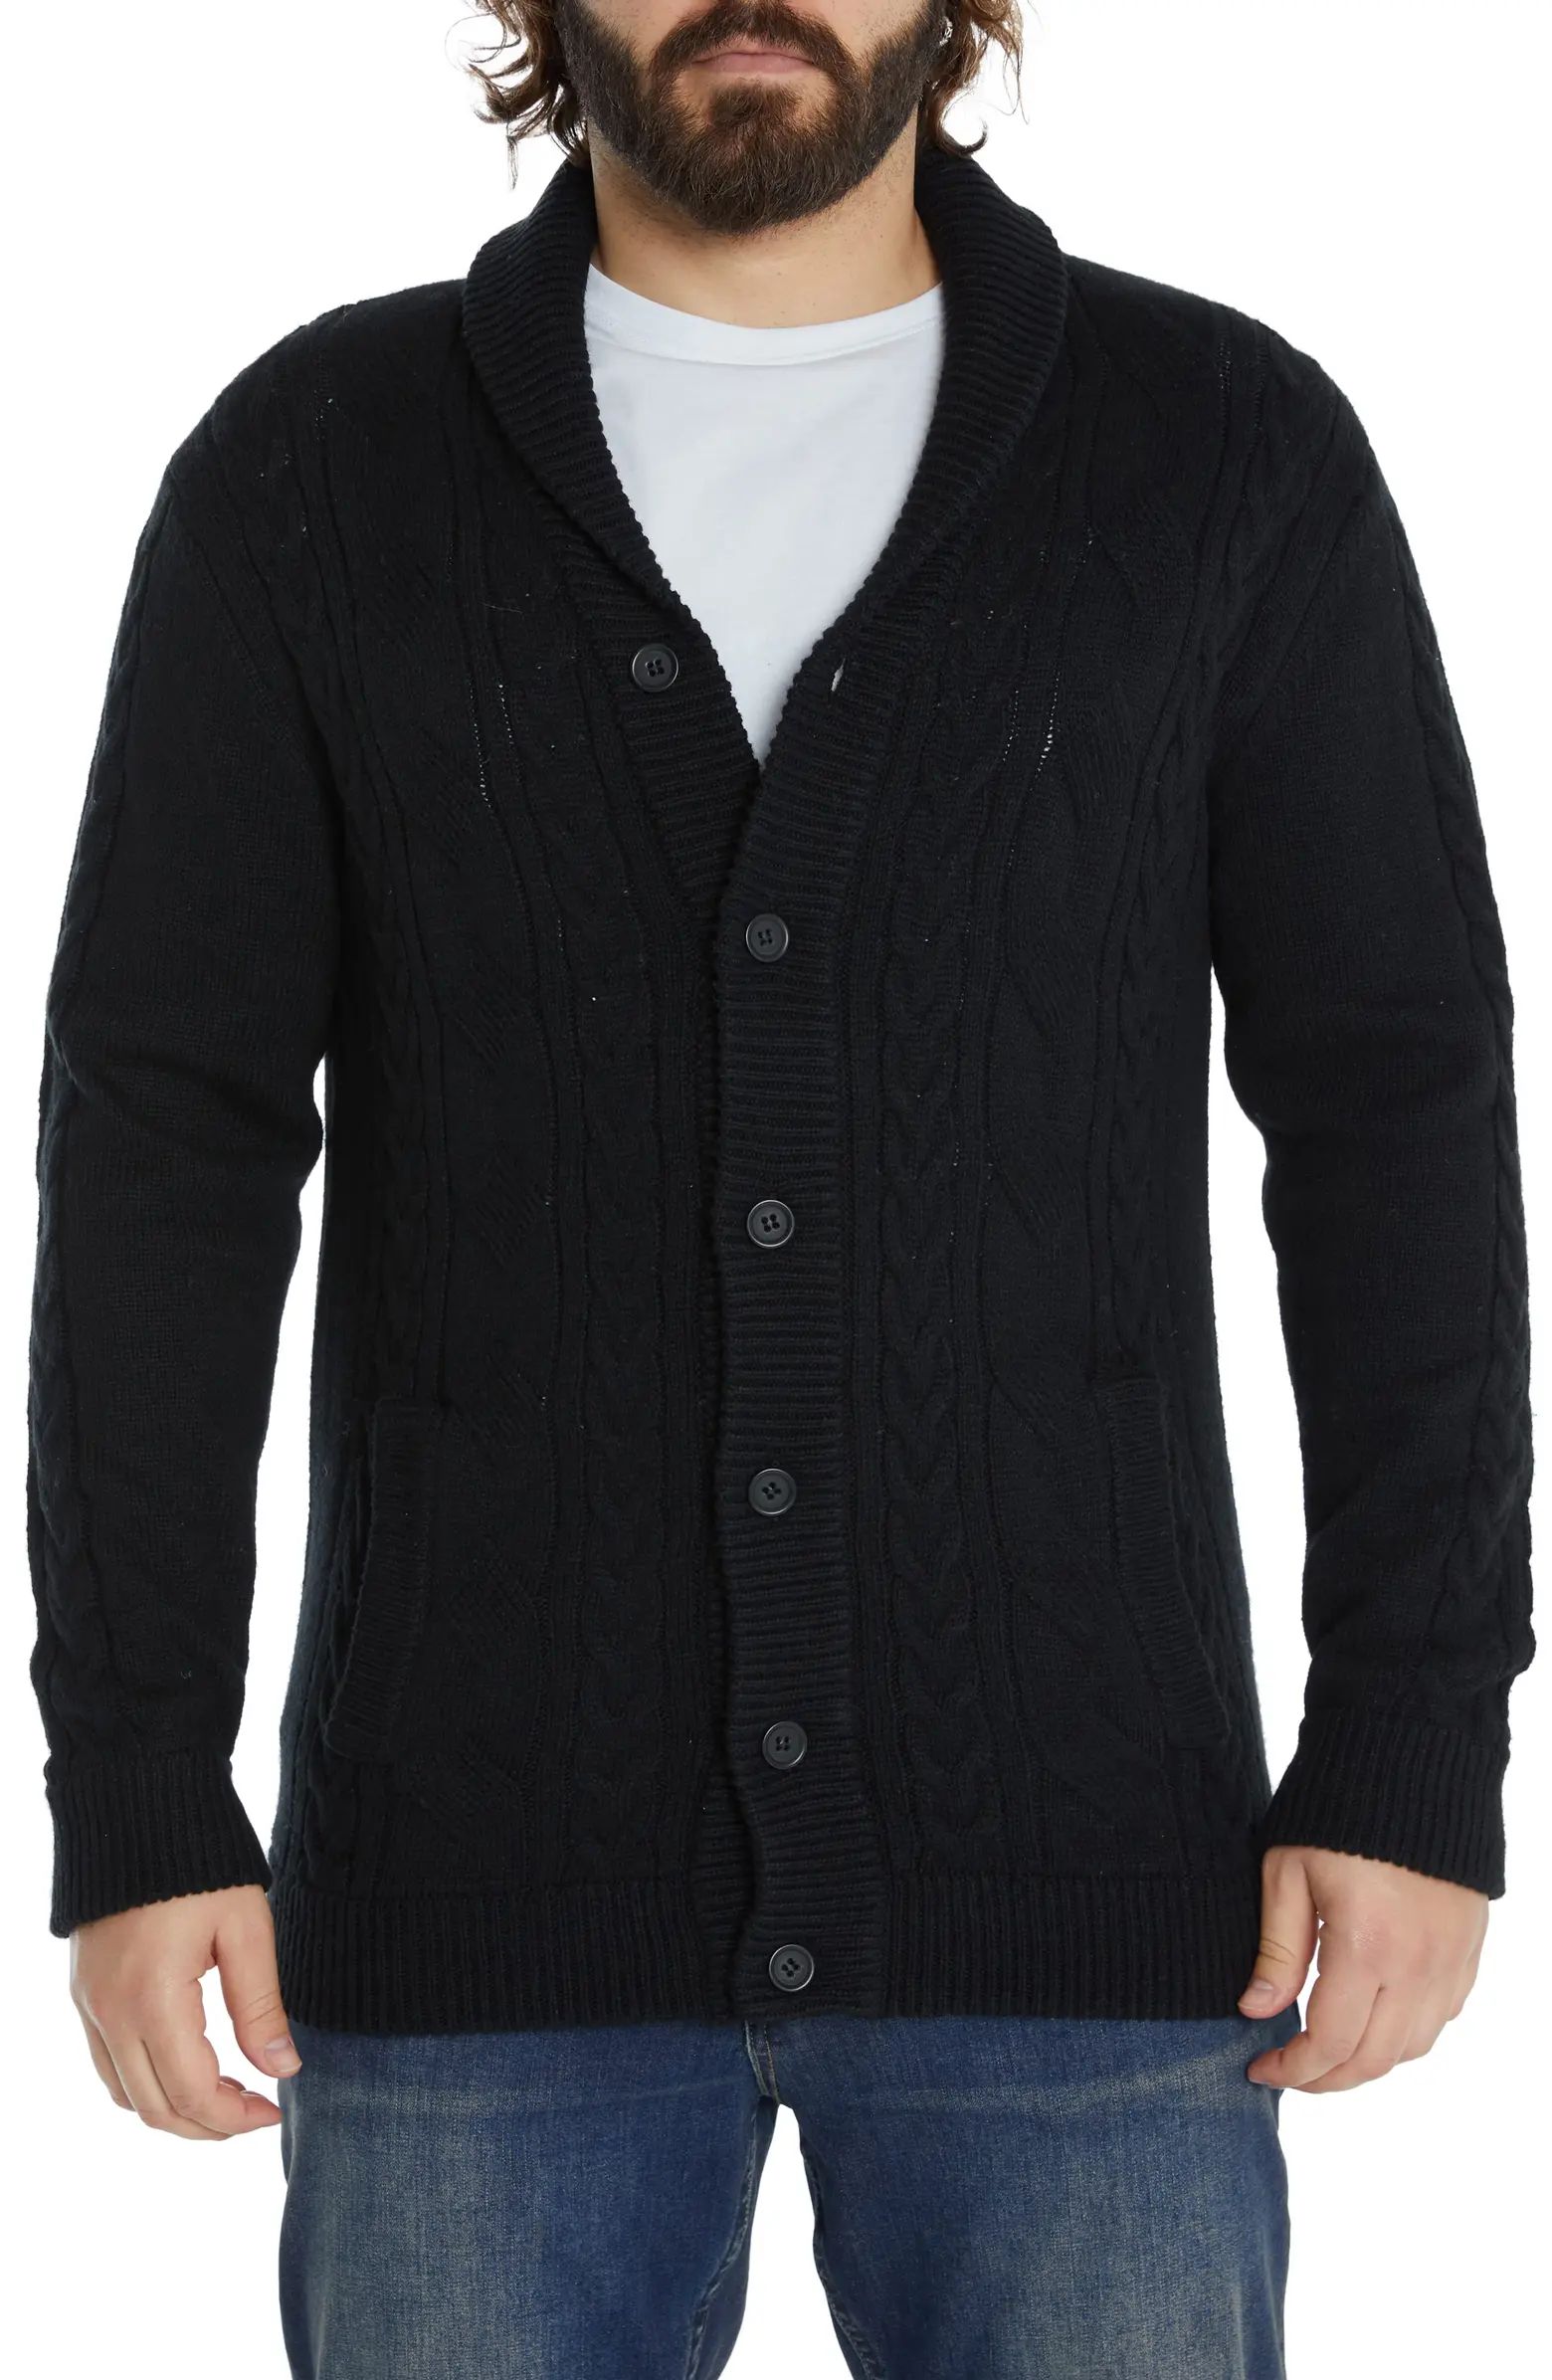 Johnny Bigg Whendon Cable Cardigan | Nordstrom | Nordstrom